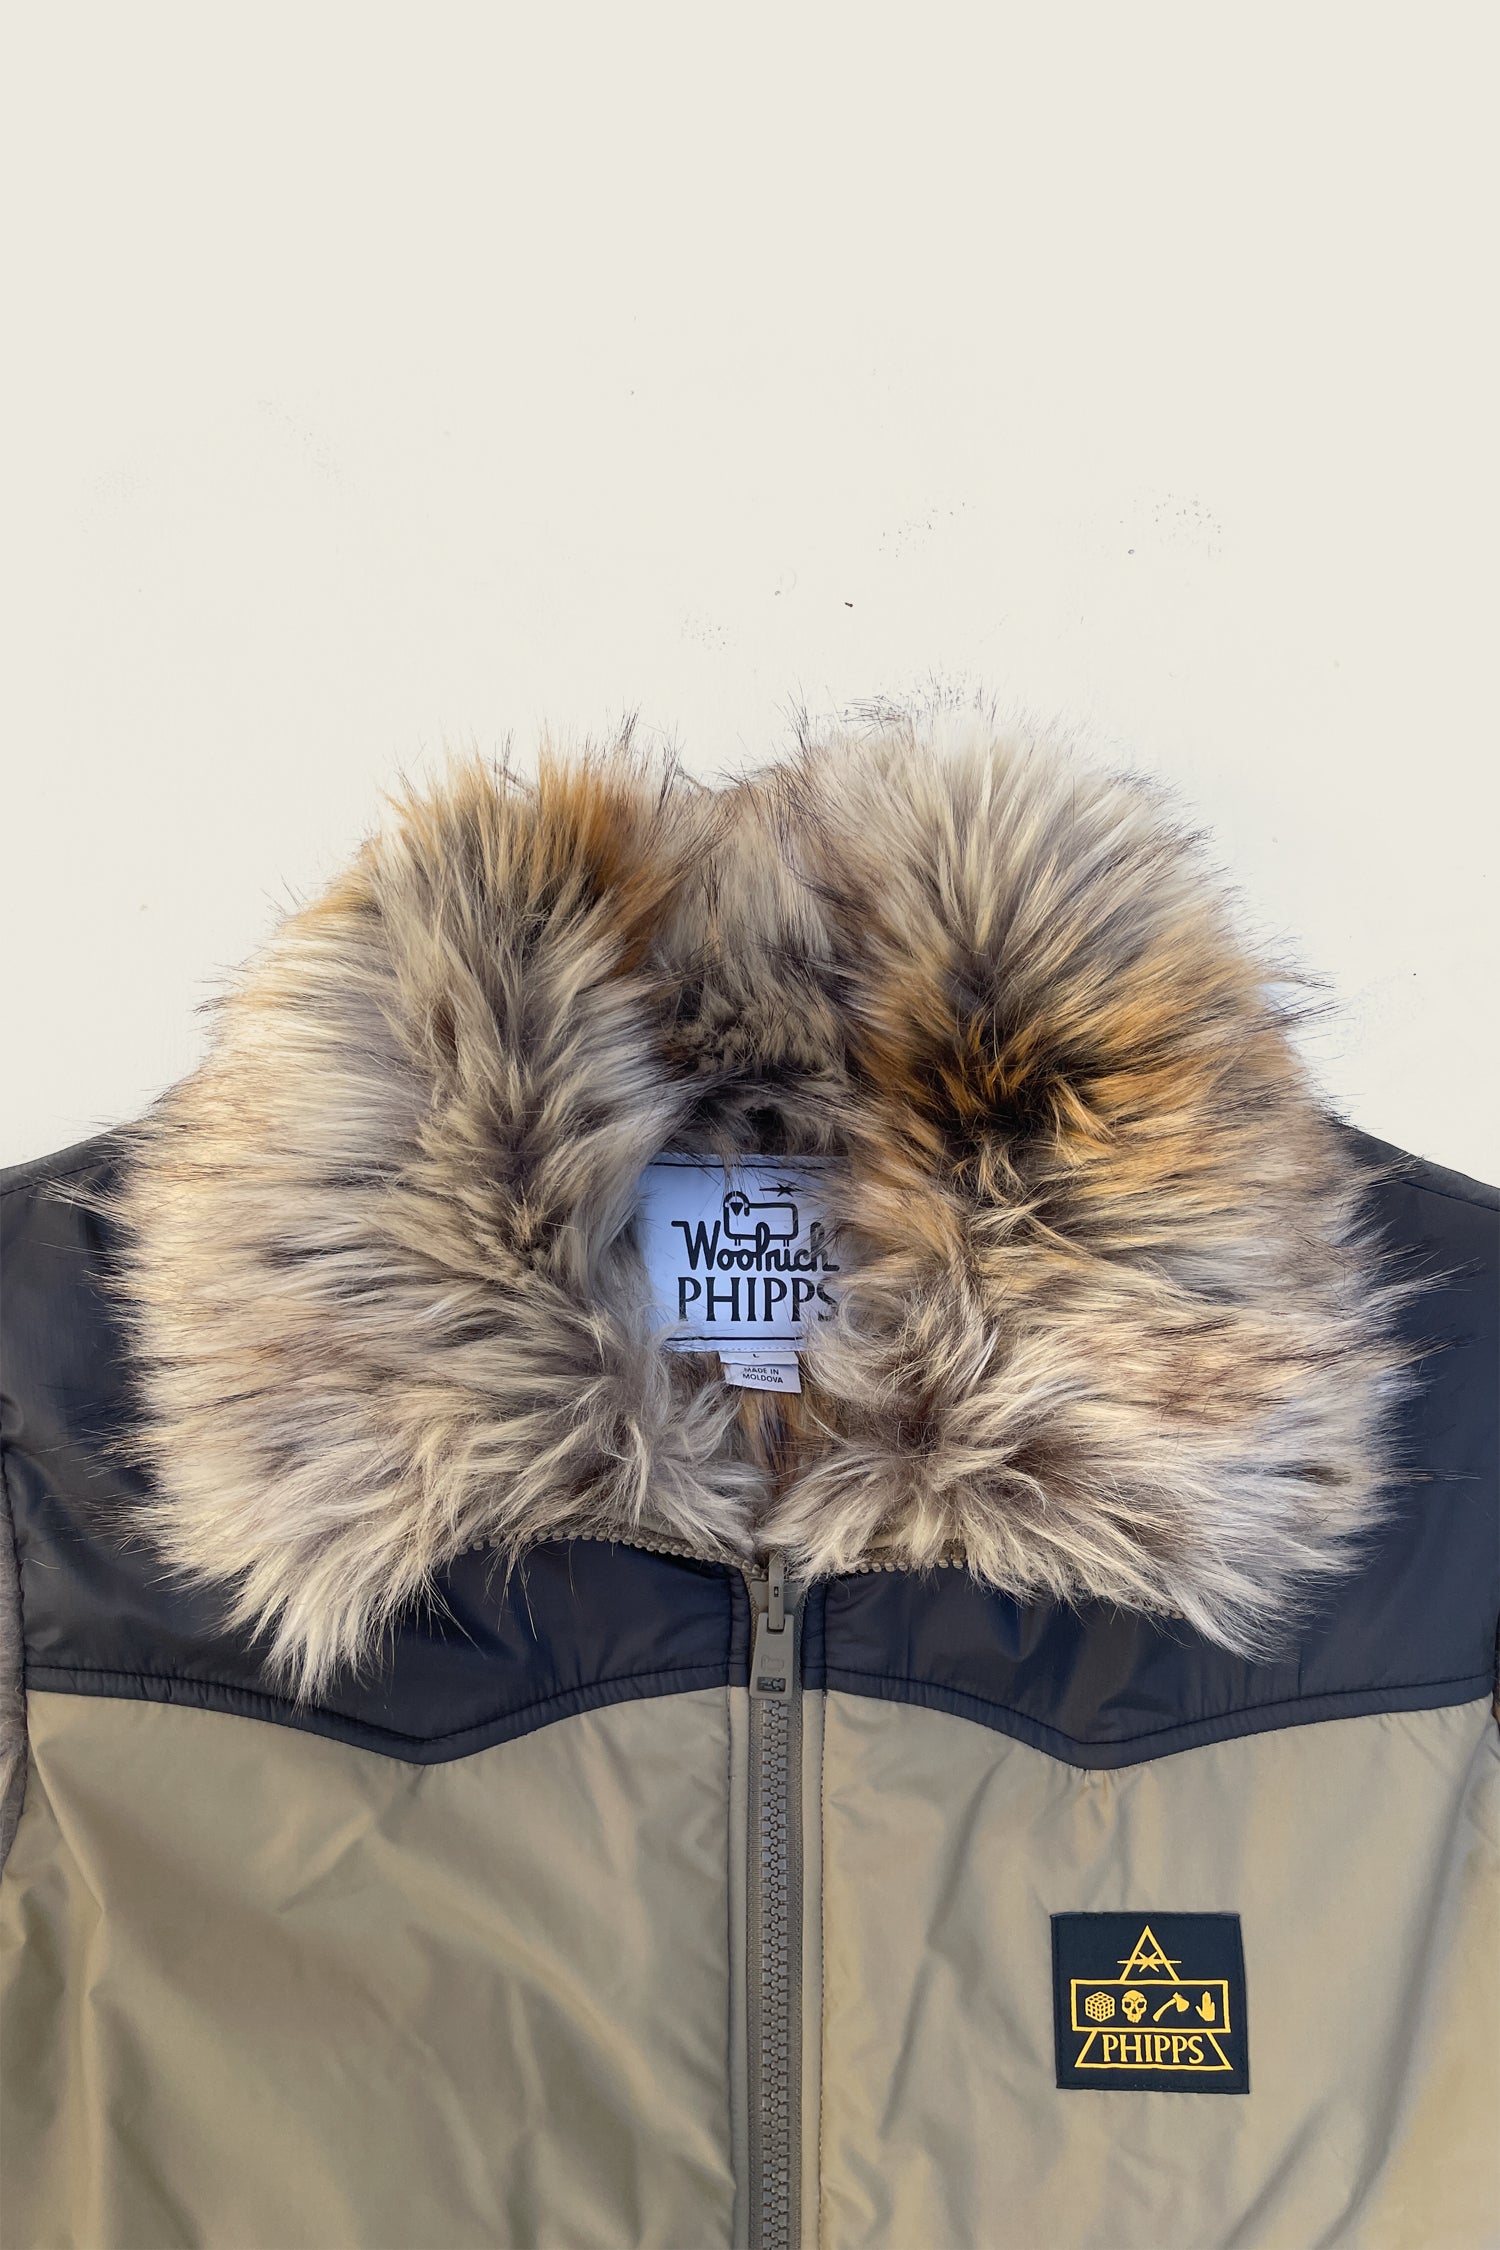 PHIPPS Reversible Puffer Vest made with deadstock upcycled nylon 